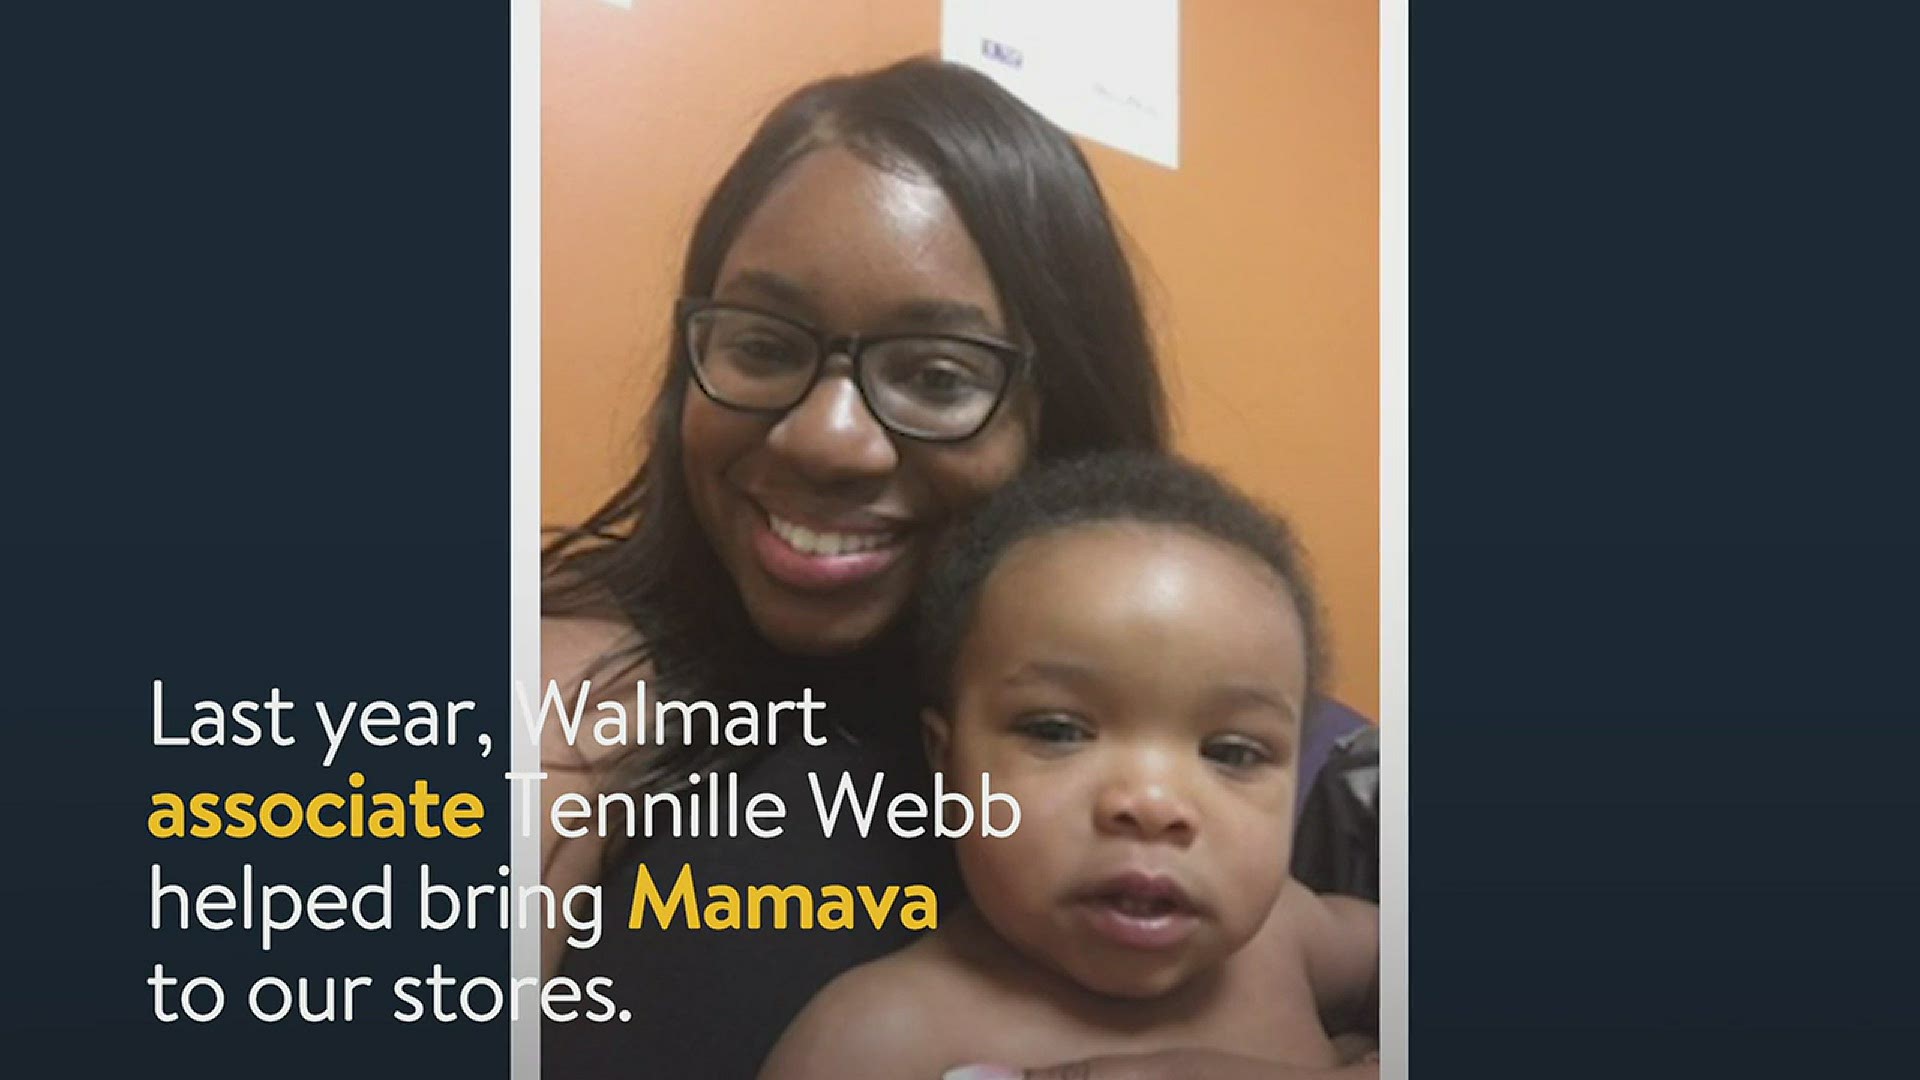 Walmart has become the first retailer to install Mamava breastfeeding suites so employees and shoppers can have easy access and privacy while breasfeeding.